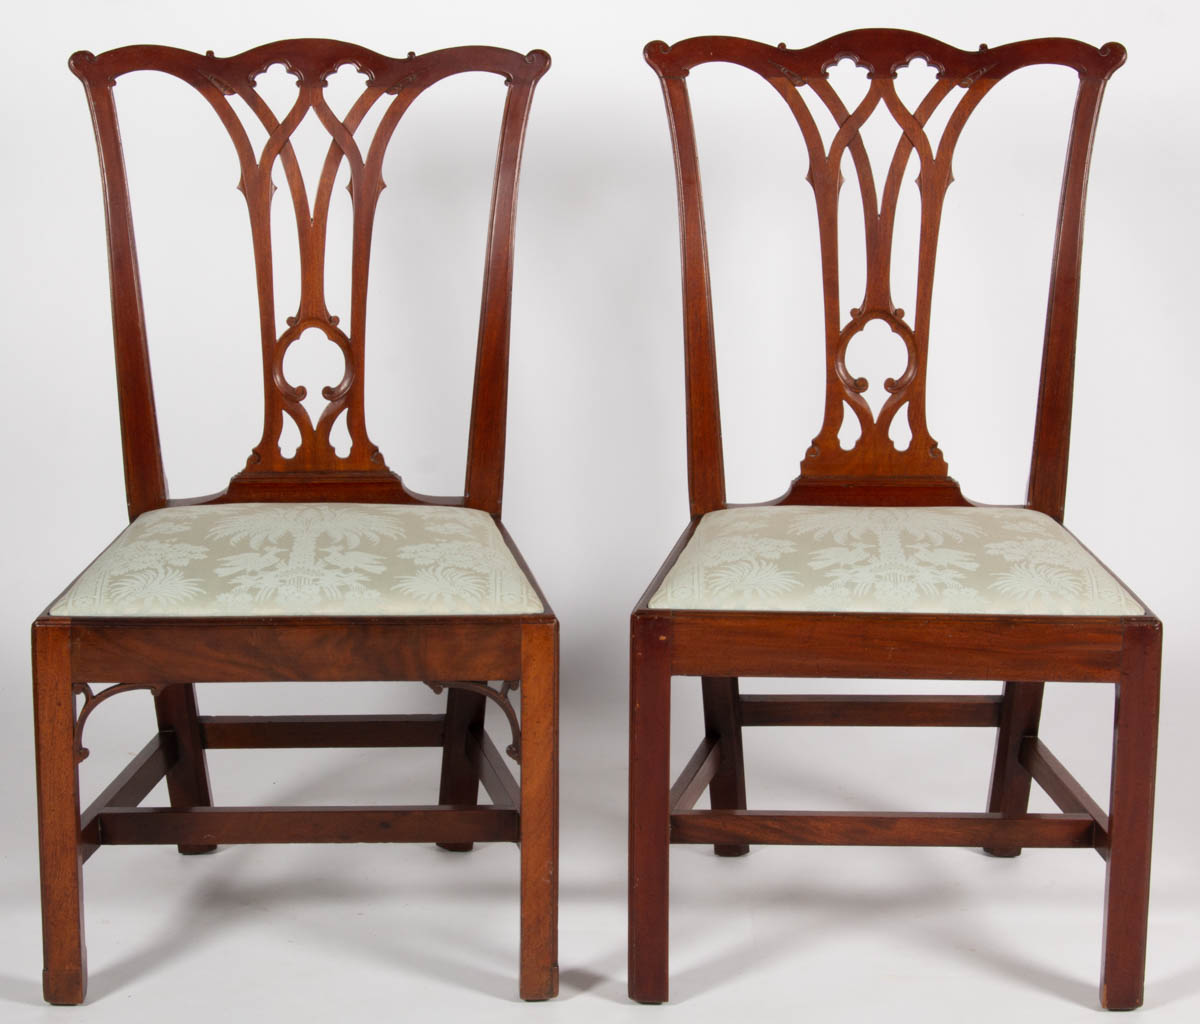 PHILADELPHIA CHIPPENDALE CARVED MAHOGANY NEAR PAIR OF SIDE CHAIRS